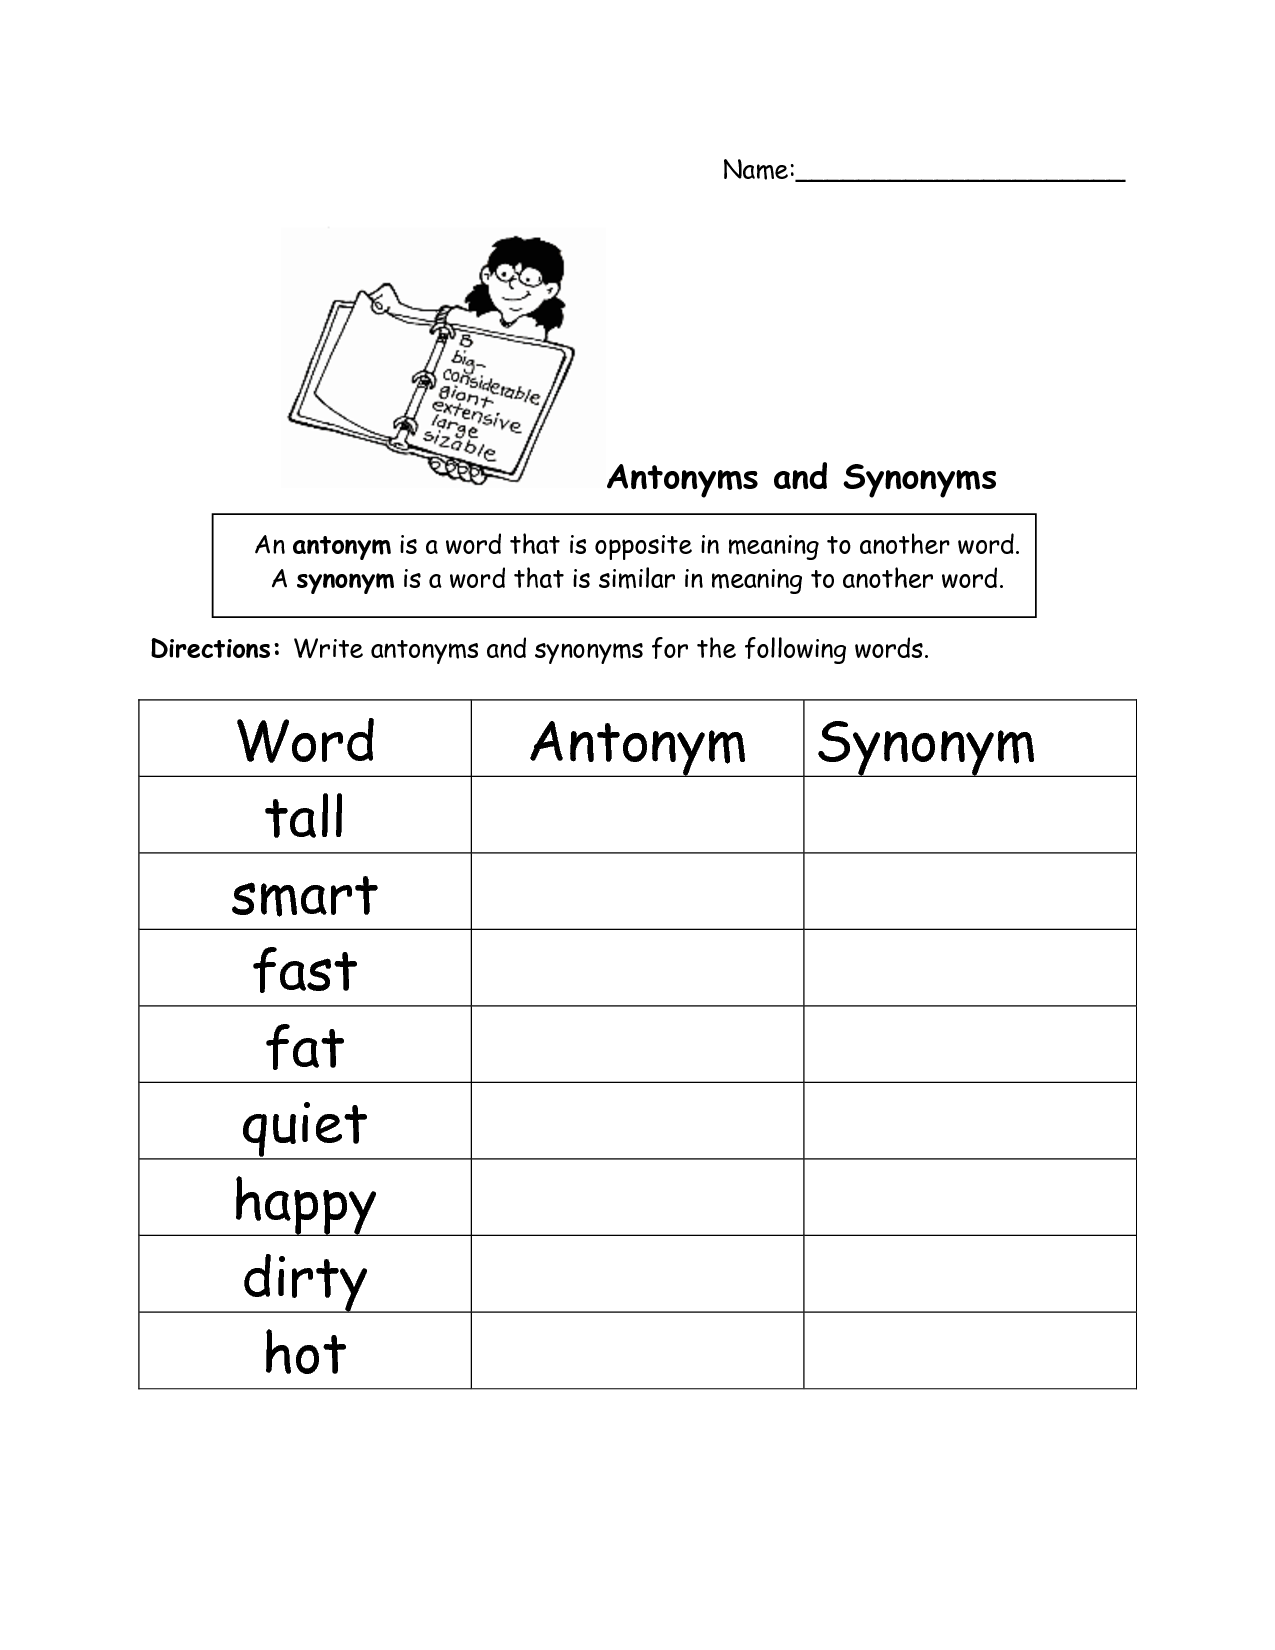 search-results-for-synonym-and-antonym-worksheets-for-first-grade-calendar-2015